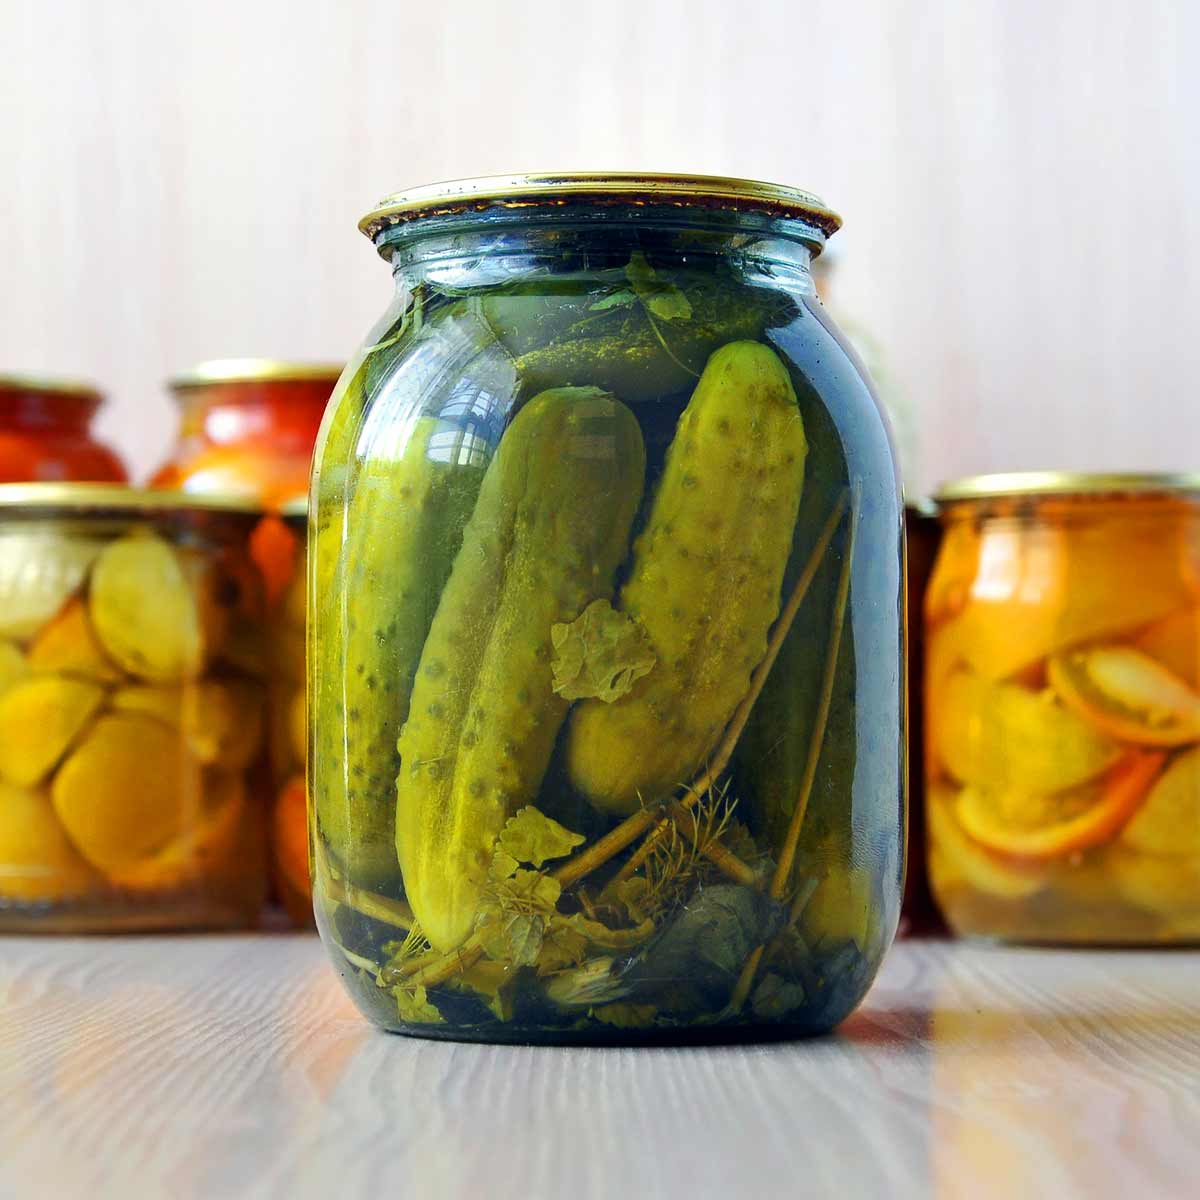 Fermented Vs. Pickled Foods: What's The Difference?